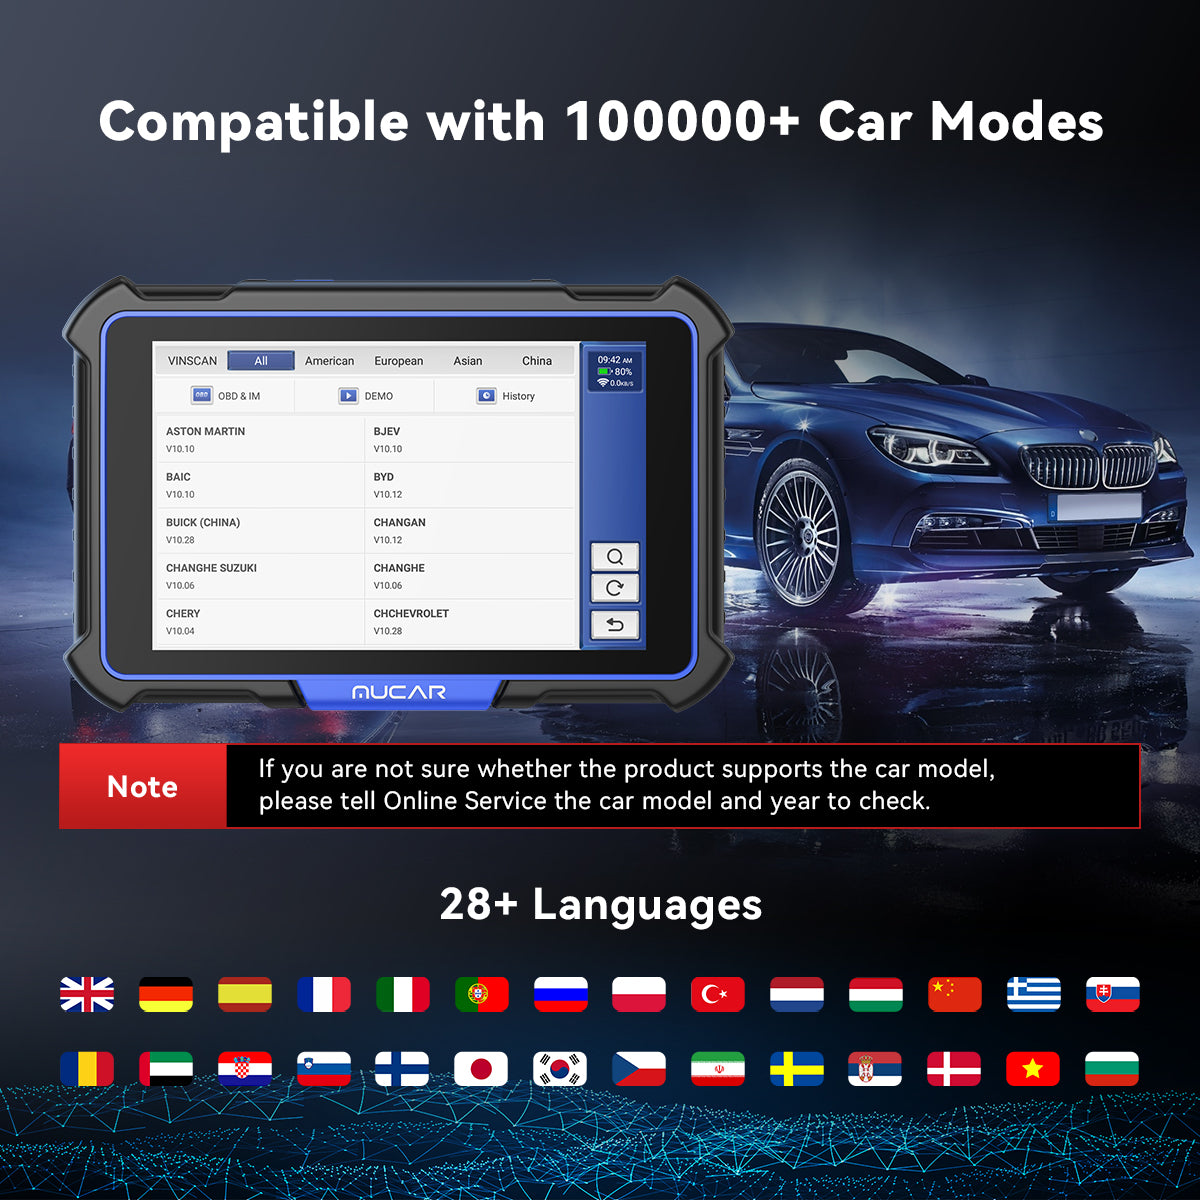 MUCAR VO8 COVER 100,000+VEHICLE MODELS 28+ LANGUAGES